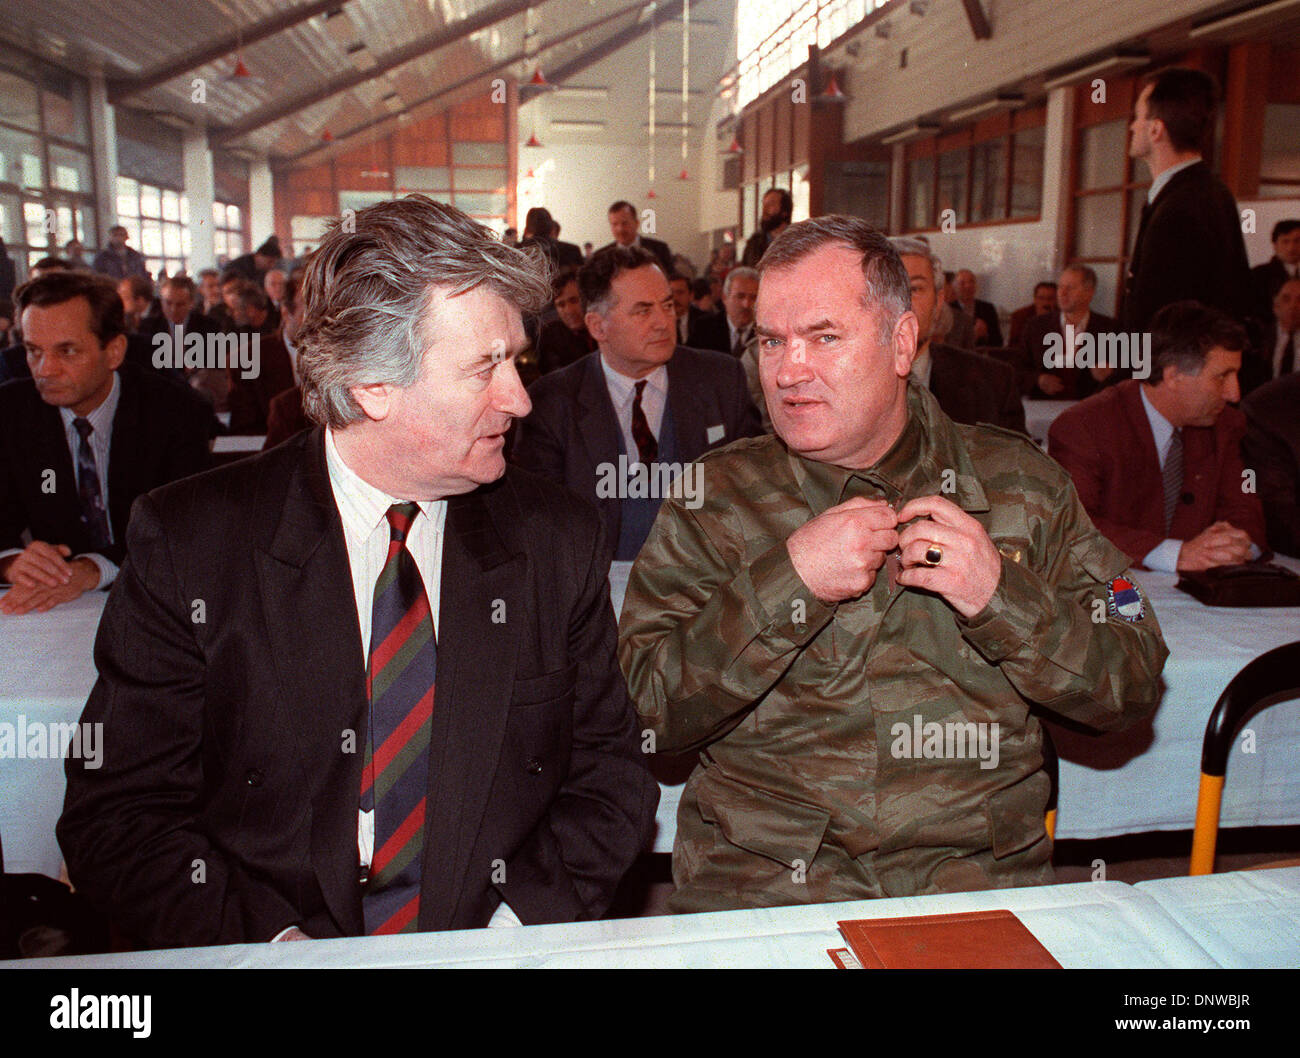 FILE PHOTO - Fugitive Bosnian Serb war crimes suspect RATKO MLADIC has been arrested in Serbia after 16 years on the run.  Mladic, 69, was found in the village of Lazarevo in northern Serbia where had been living under an assumed name. He faces charges over the massacre of at least 7,500 Bosnian Muslim men and boys at Srebrenica in 1995.  PICTURED:  Jan. 1, 1993 [Exact Date Unknown Stock Photo